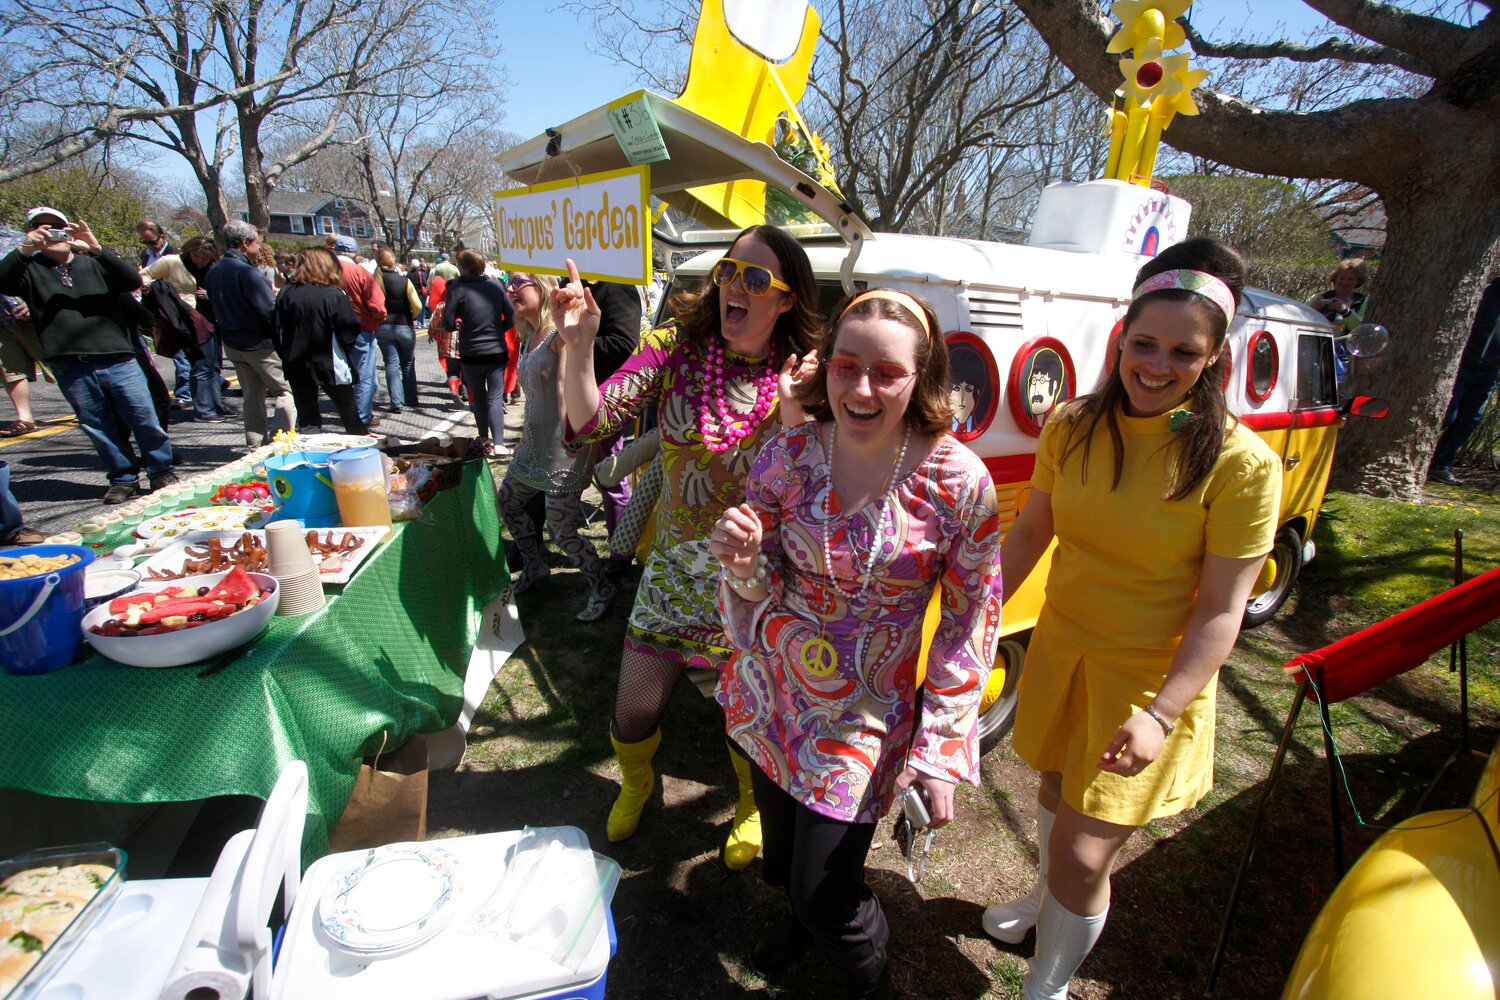 photo by Jim Powers--.Scene from the annual Daffodil Festival on Saturday, April 24, 2010. Tailgate picnicking in Sconset.